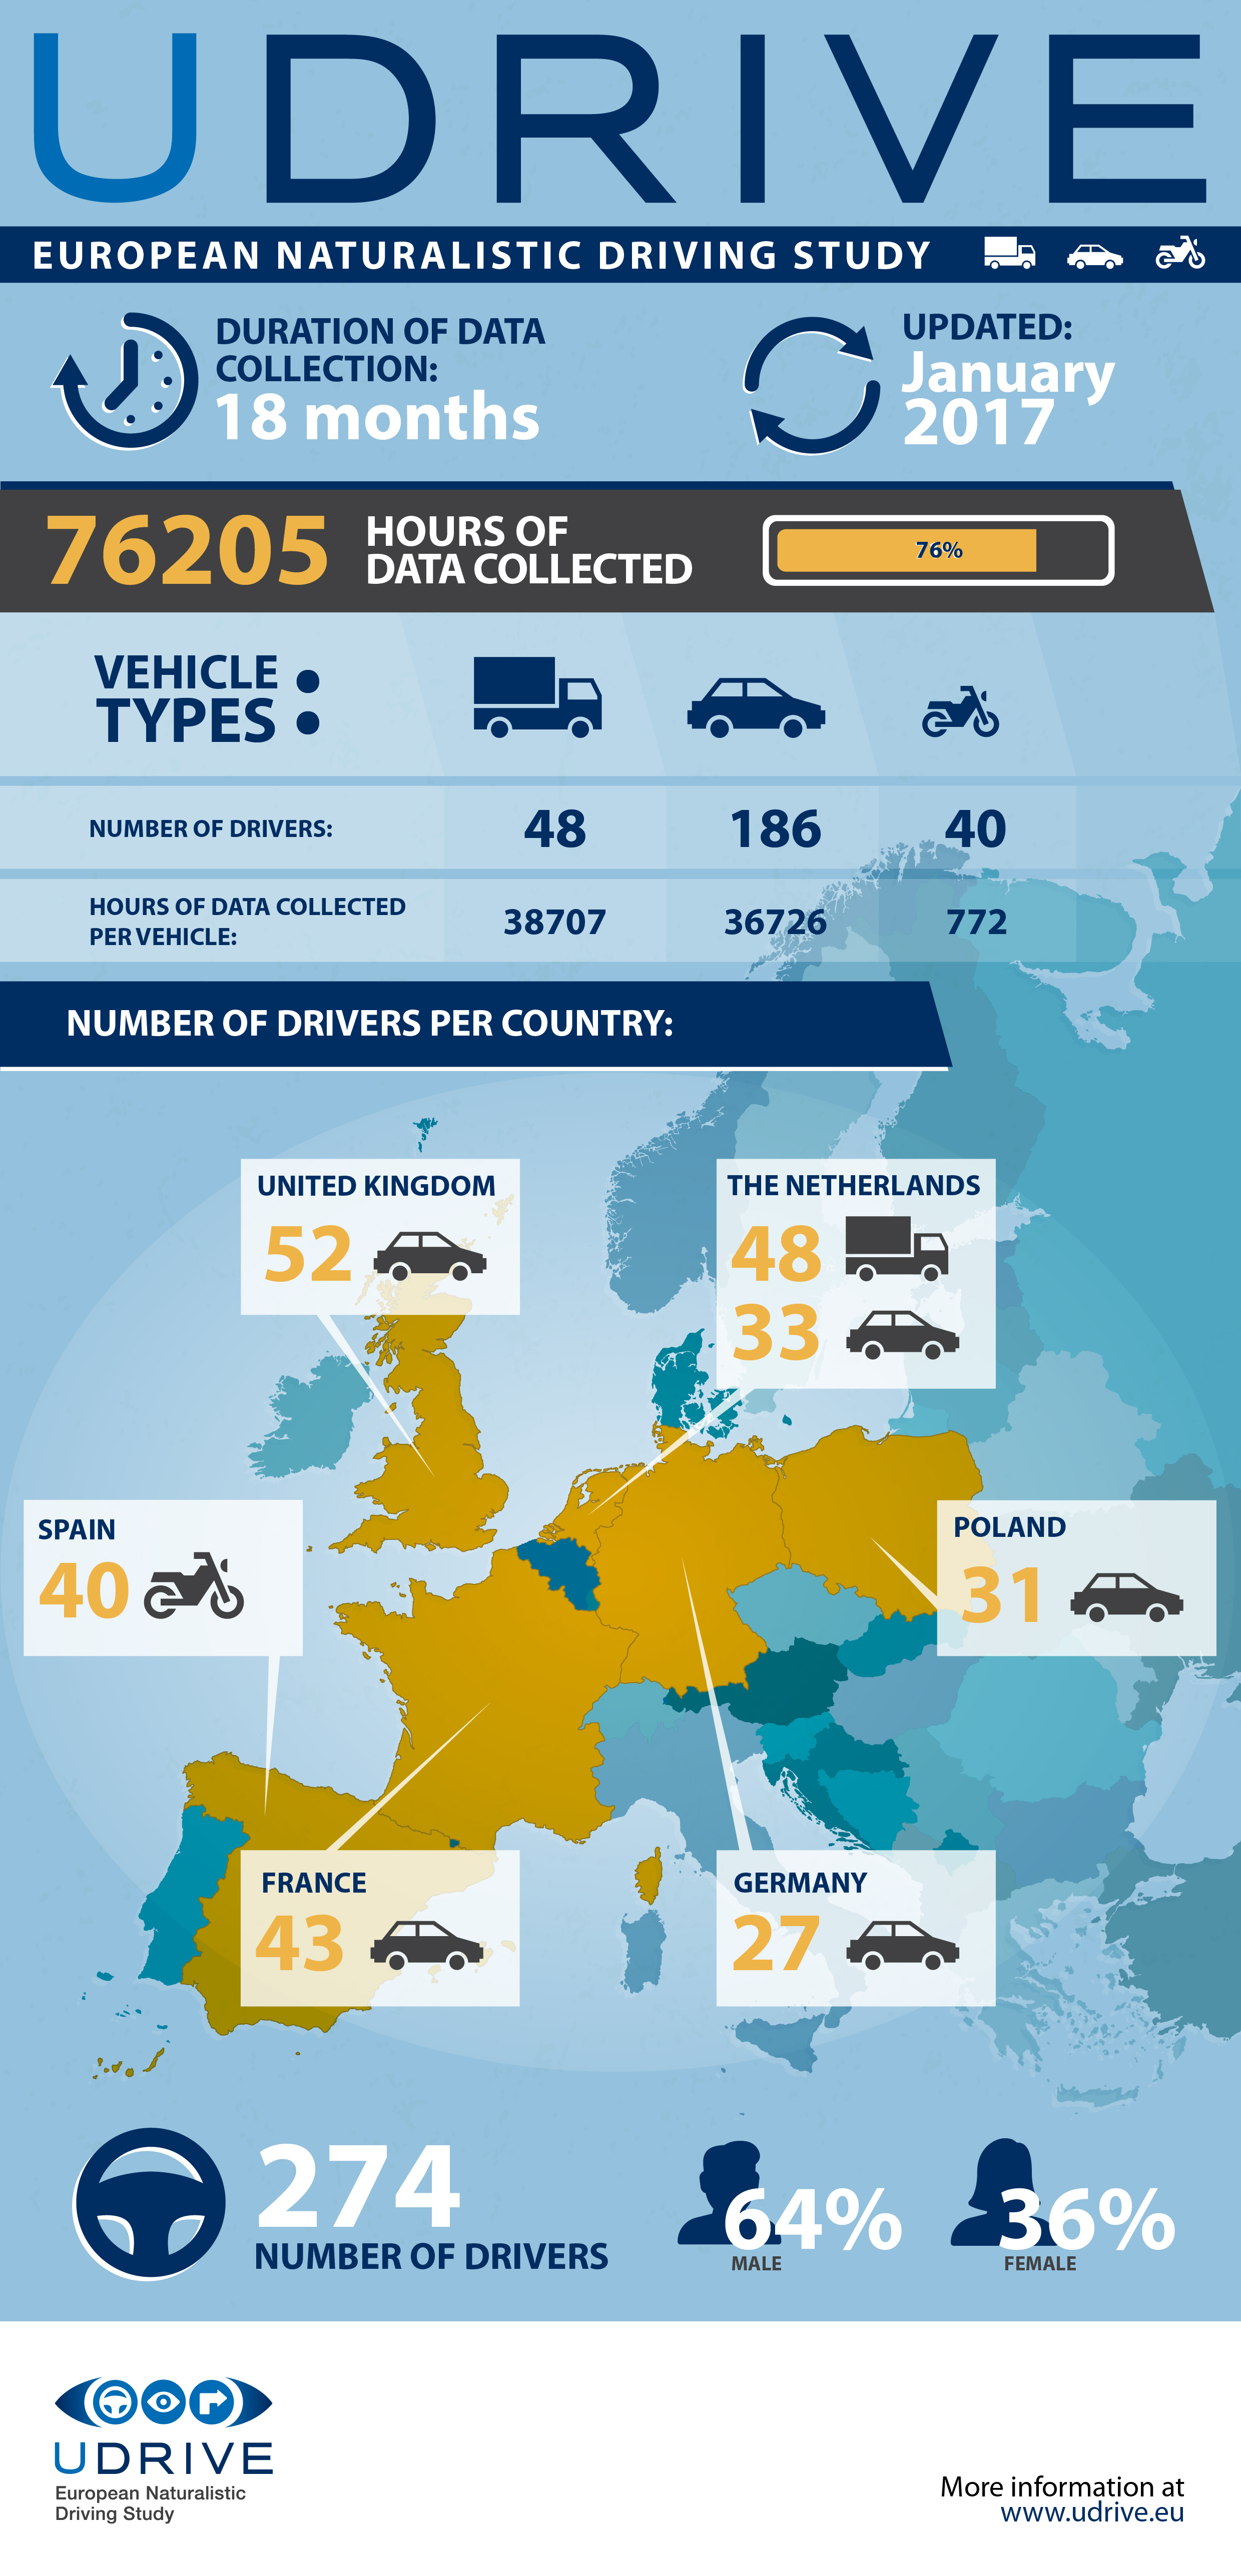 UDRIVE data infographic: January update